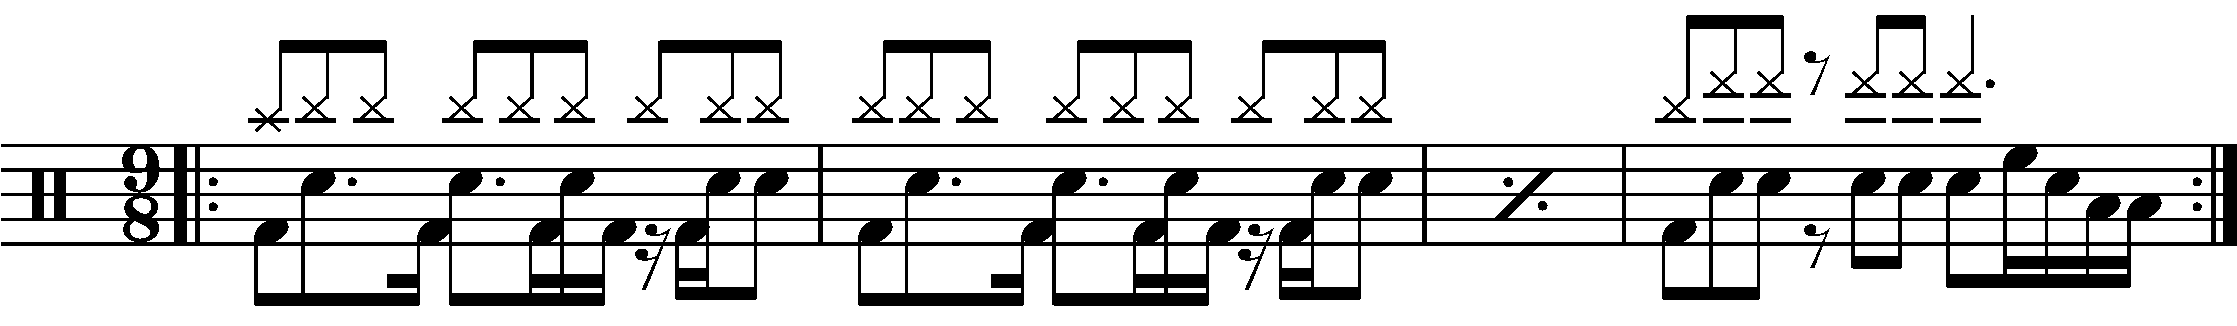 A four bar phrase in 9/8 based on patterns in double time